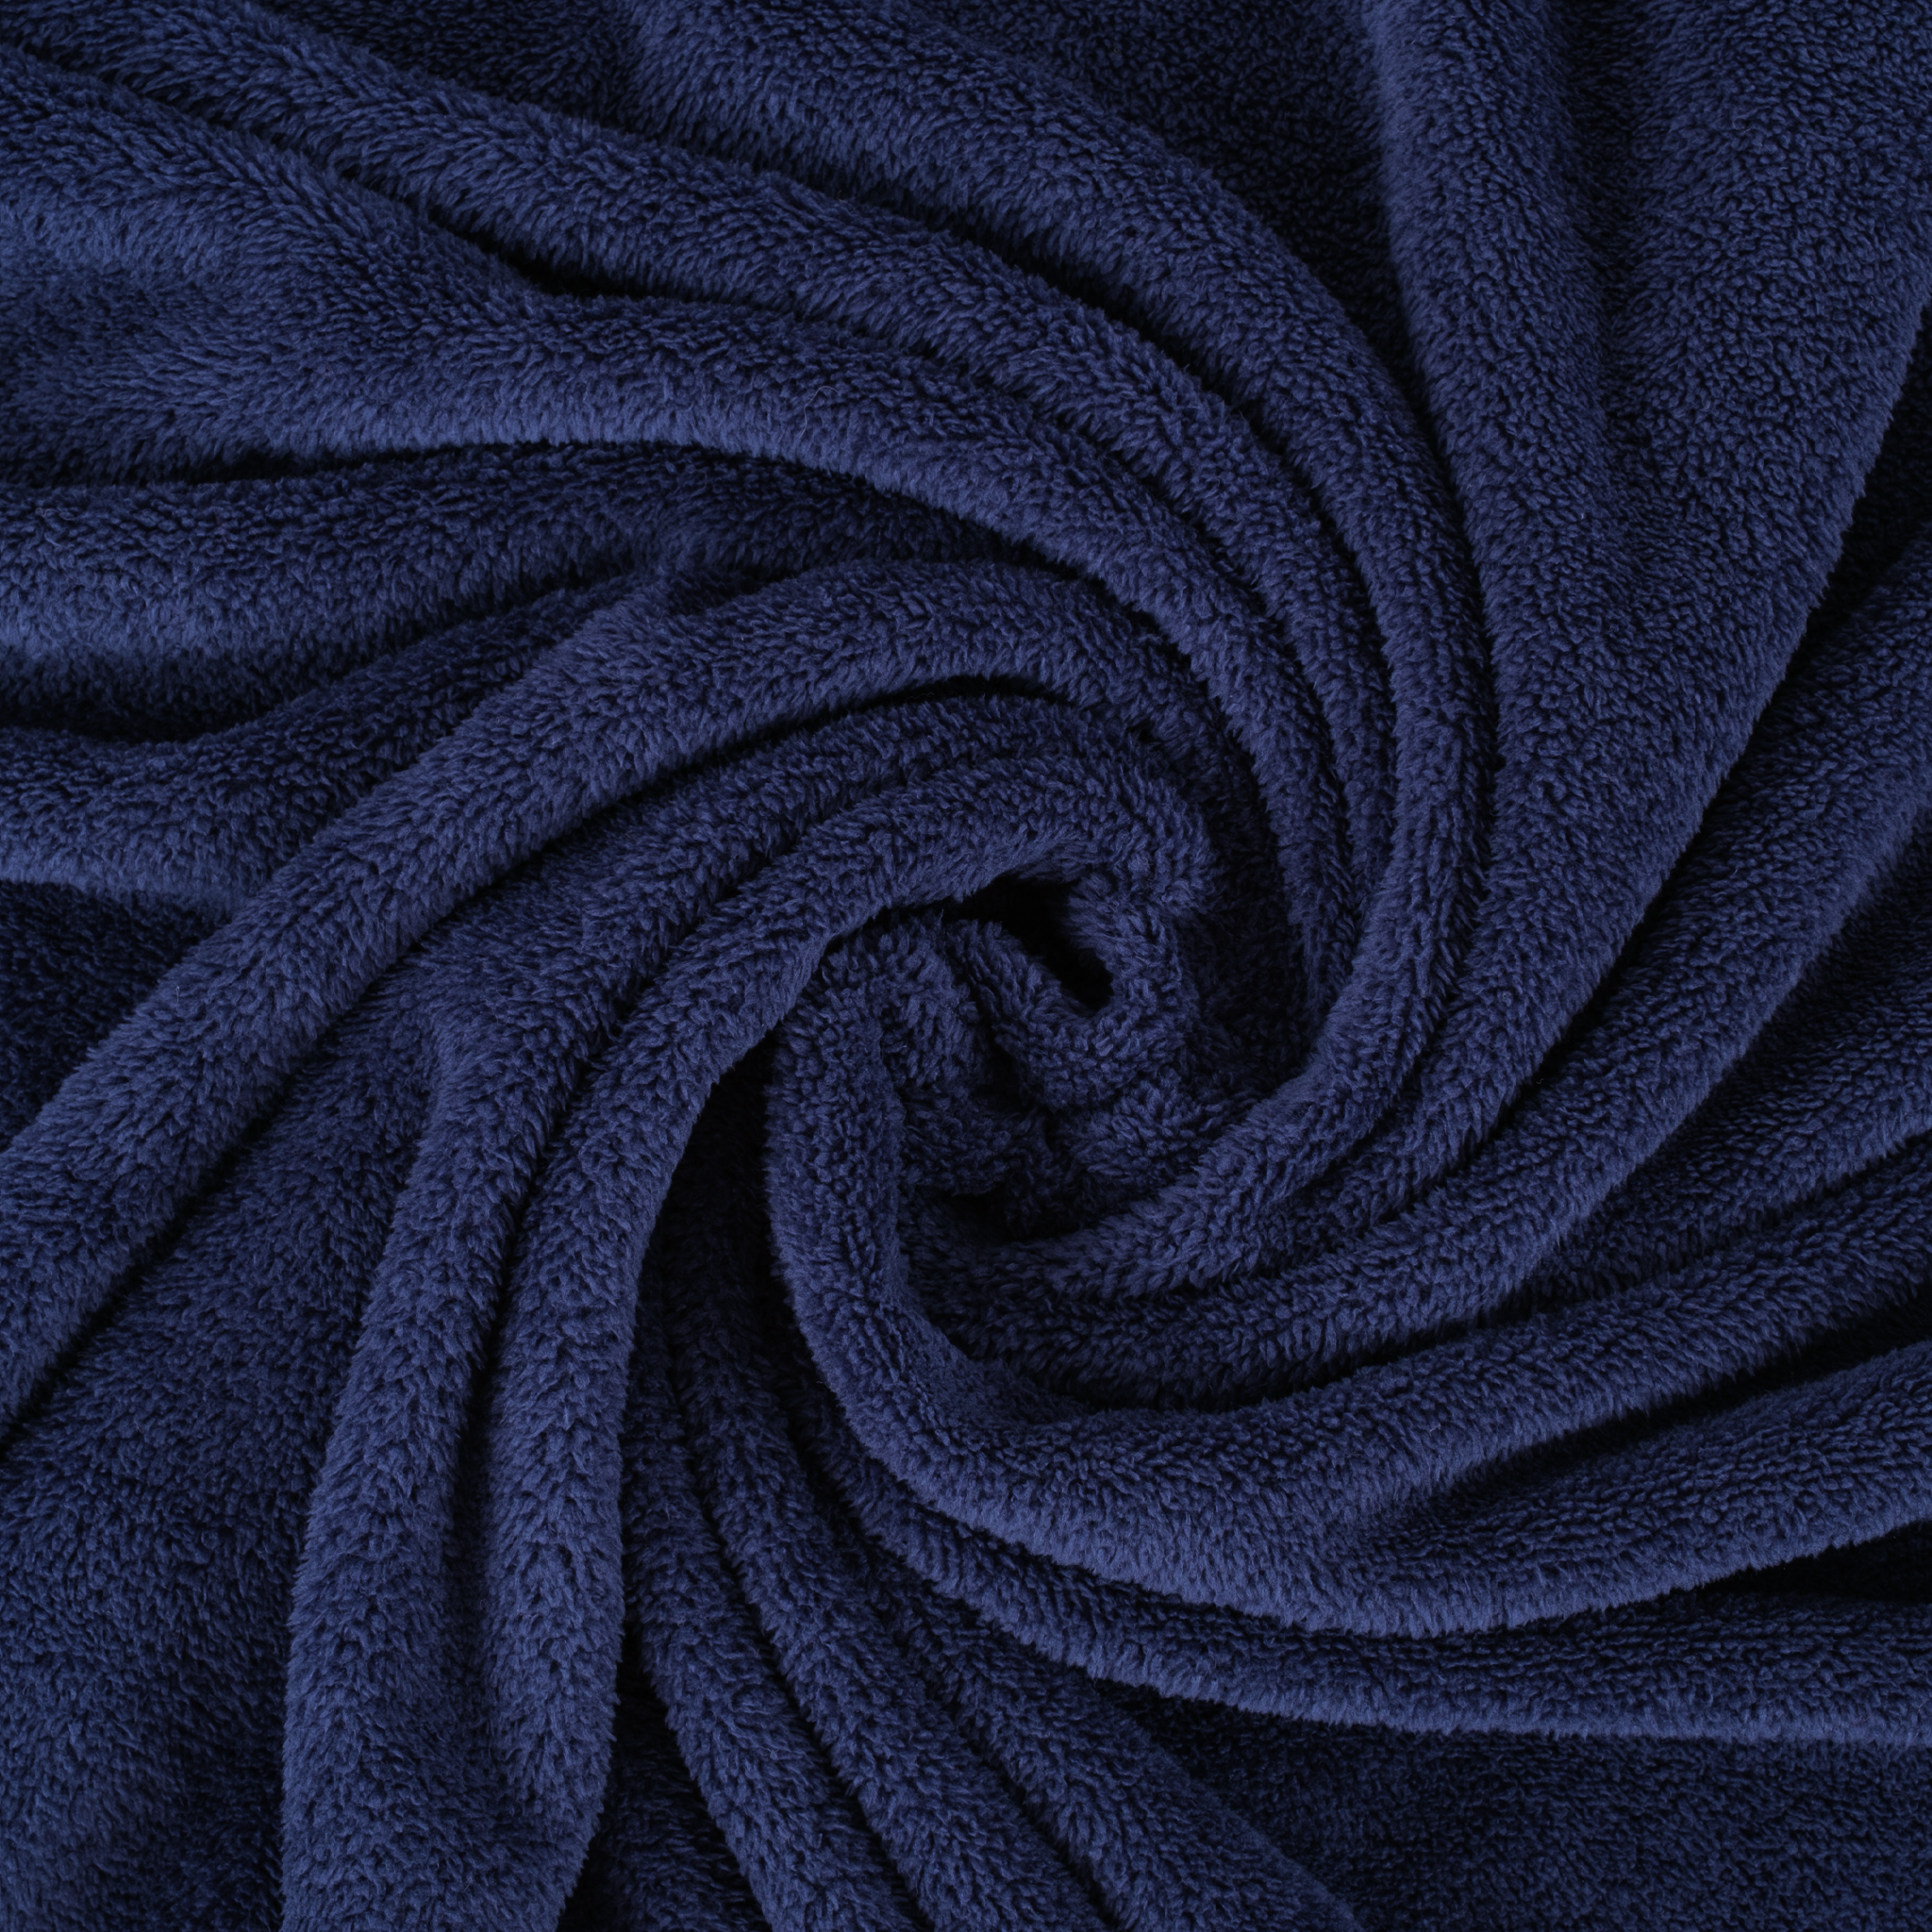 American Soft Linen - Bedding Fleece Blanket - Twin Size 60x80 inches - Navy-Blue - 5